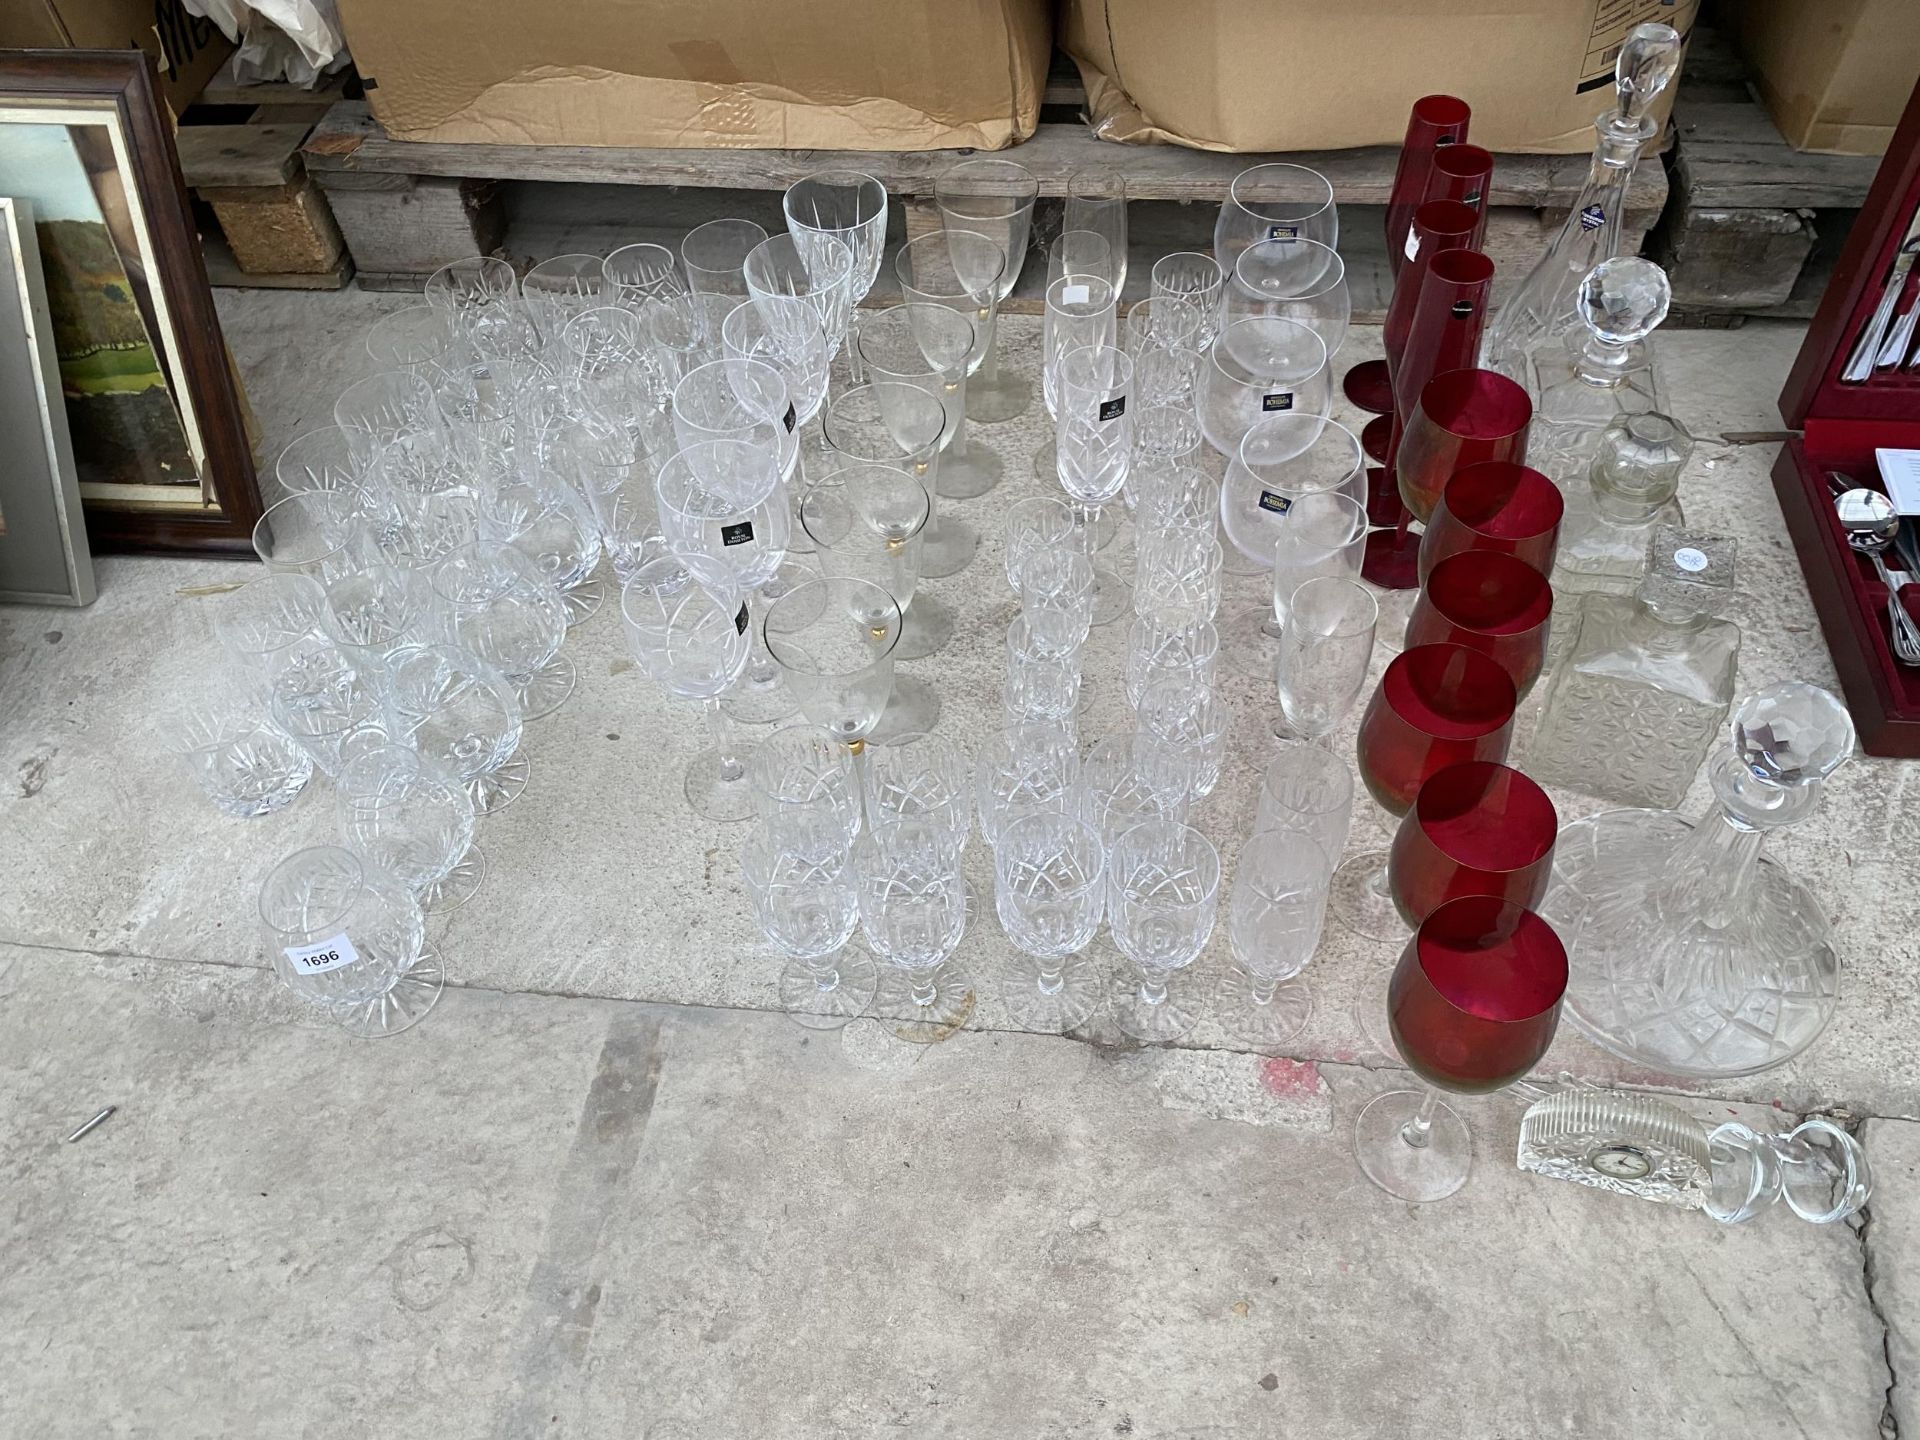 A LARGE ASSORTMENT OF MAINLY CRYSTAL GLASS WARE TO INCLUDE DECANTERS, WINE GLASSES AND CHAMPAGNE